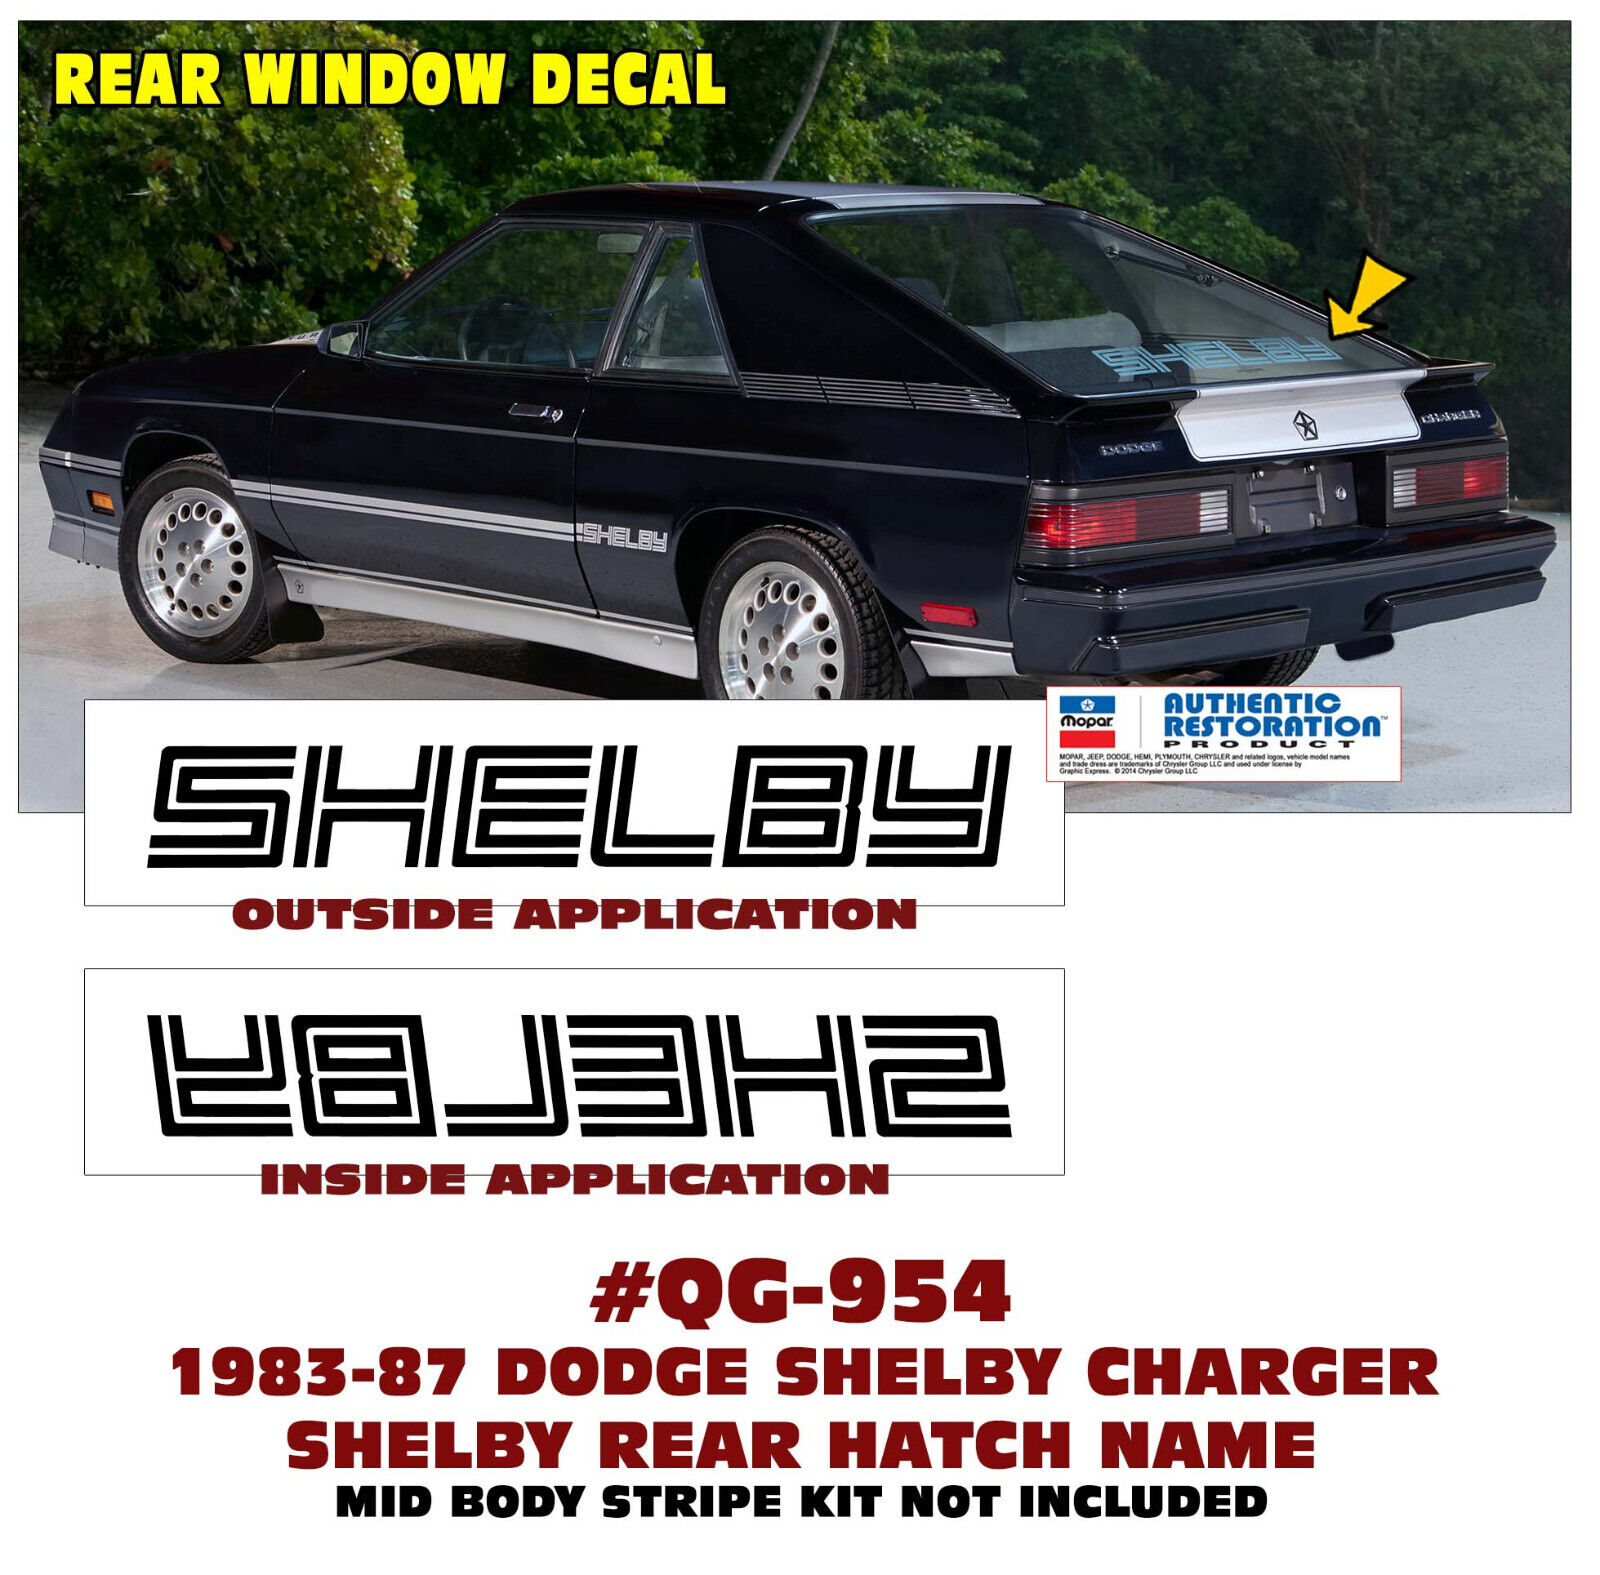 SP QG-954 1983-1987 DODGE SHELBY CHARGER - SHELBY HATCH NAME - LICENSED